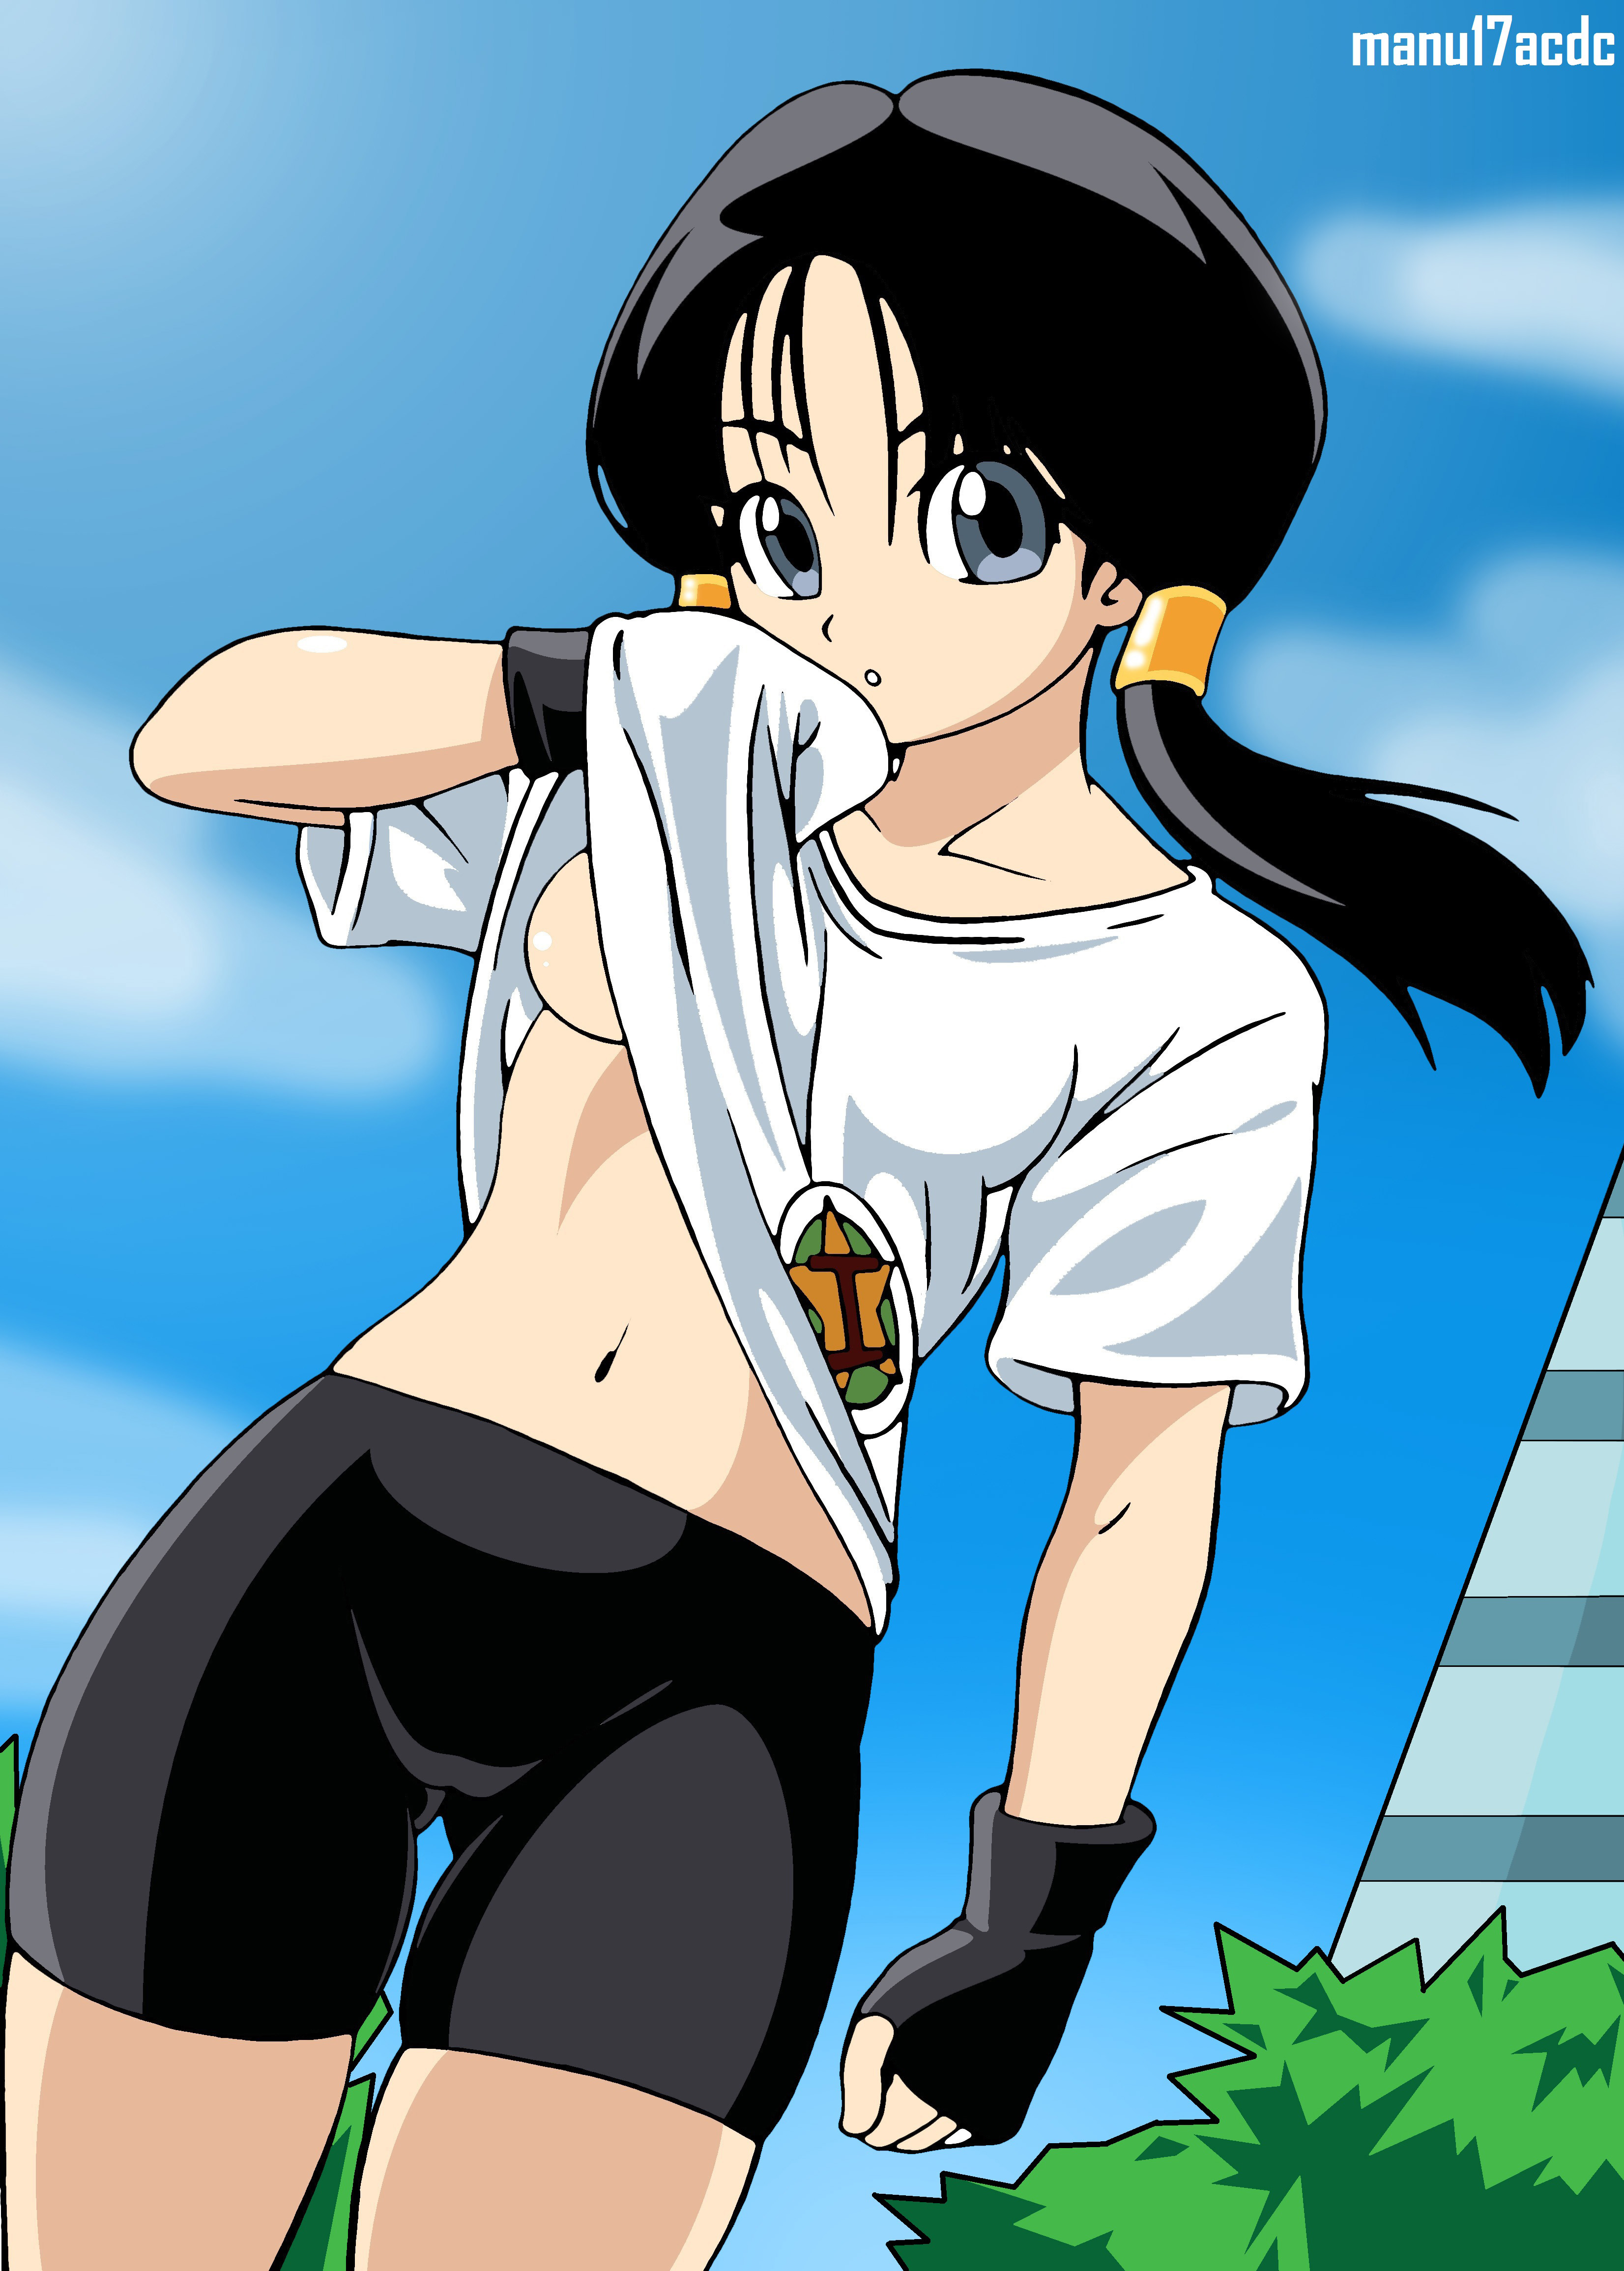 Videl By Manu17acdc